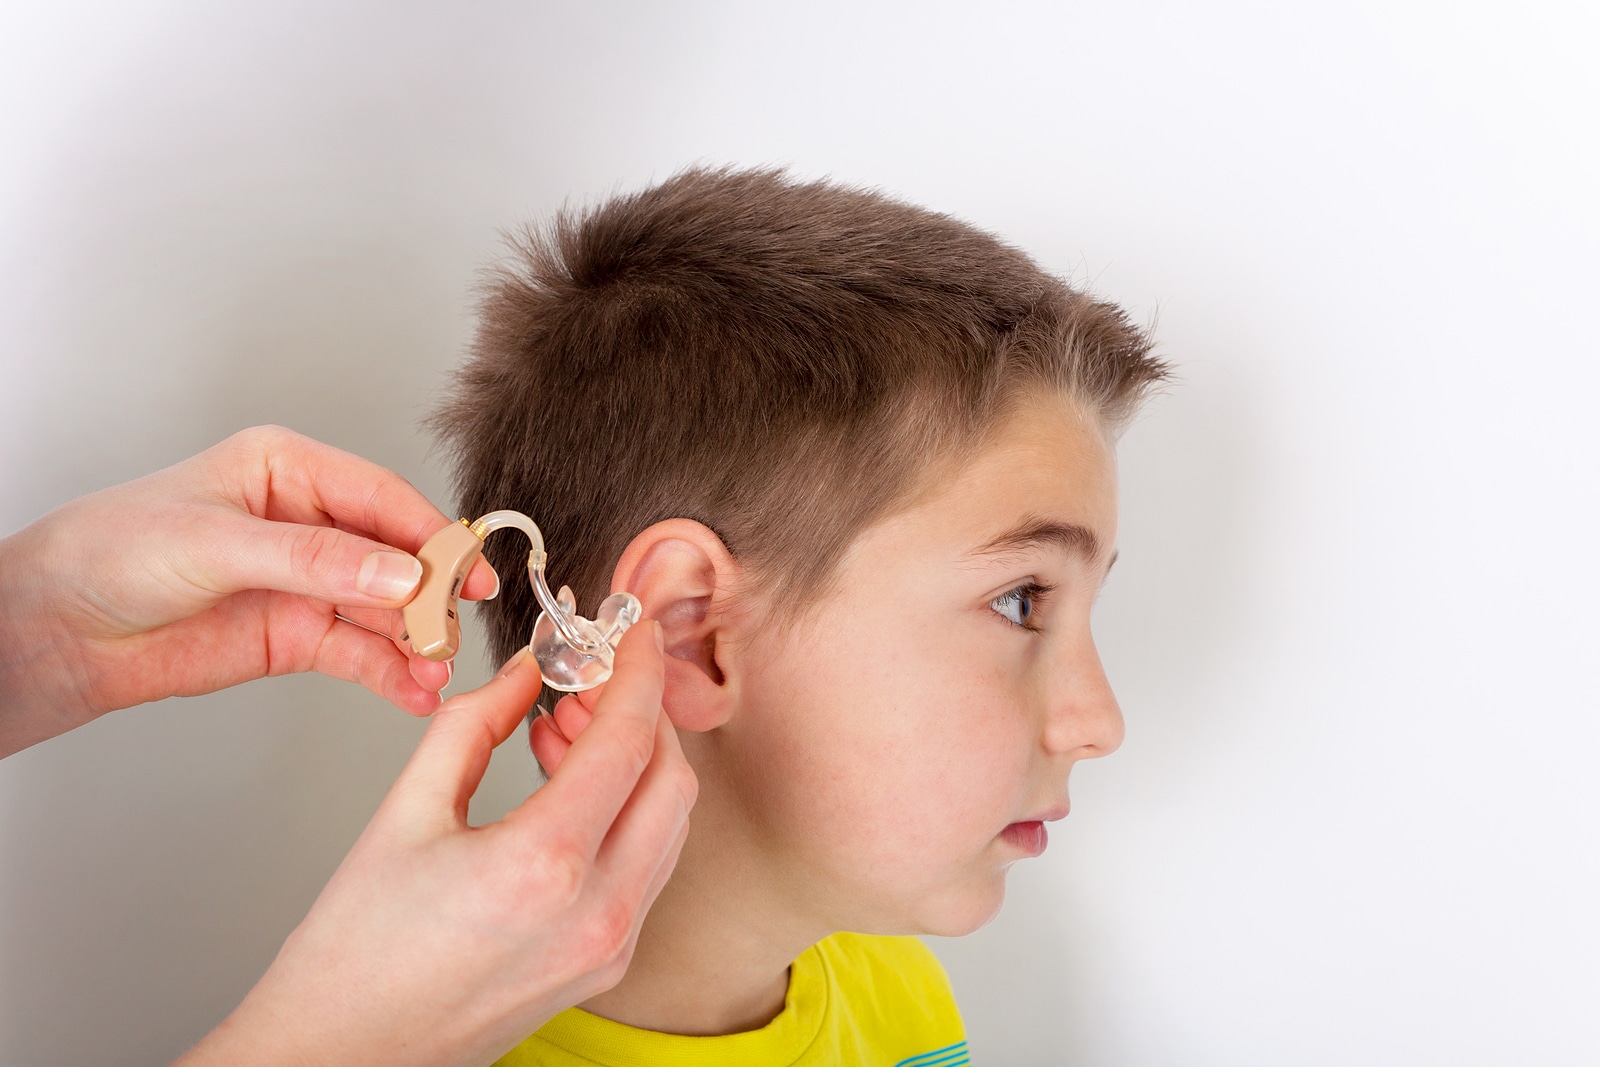 Audiologist putting a hearing aid into young boys ear